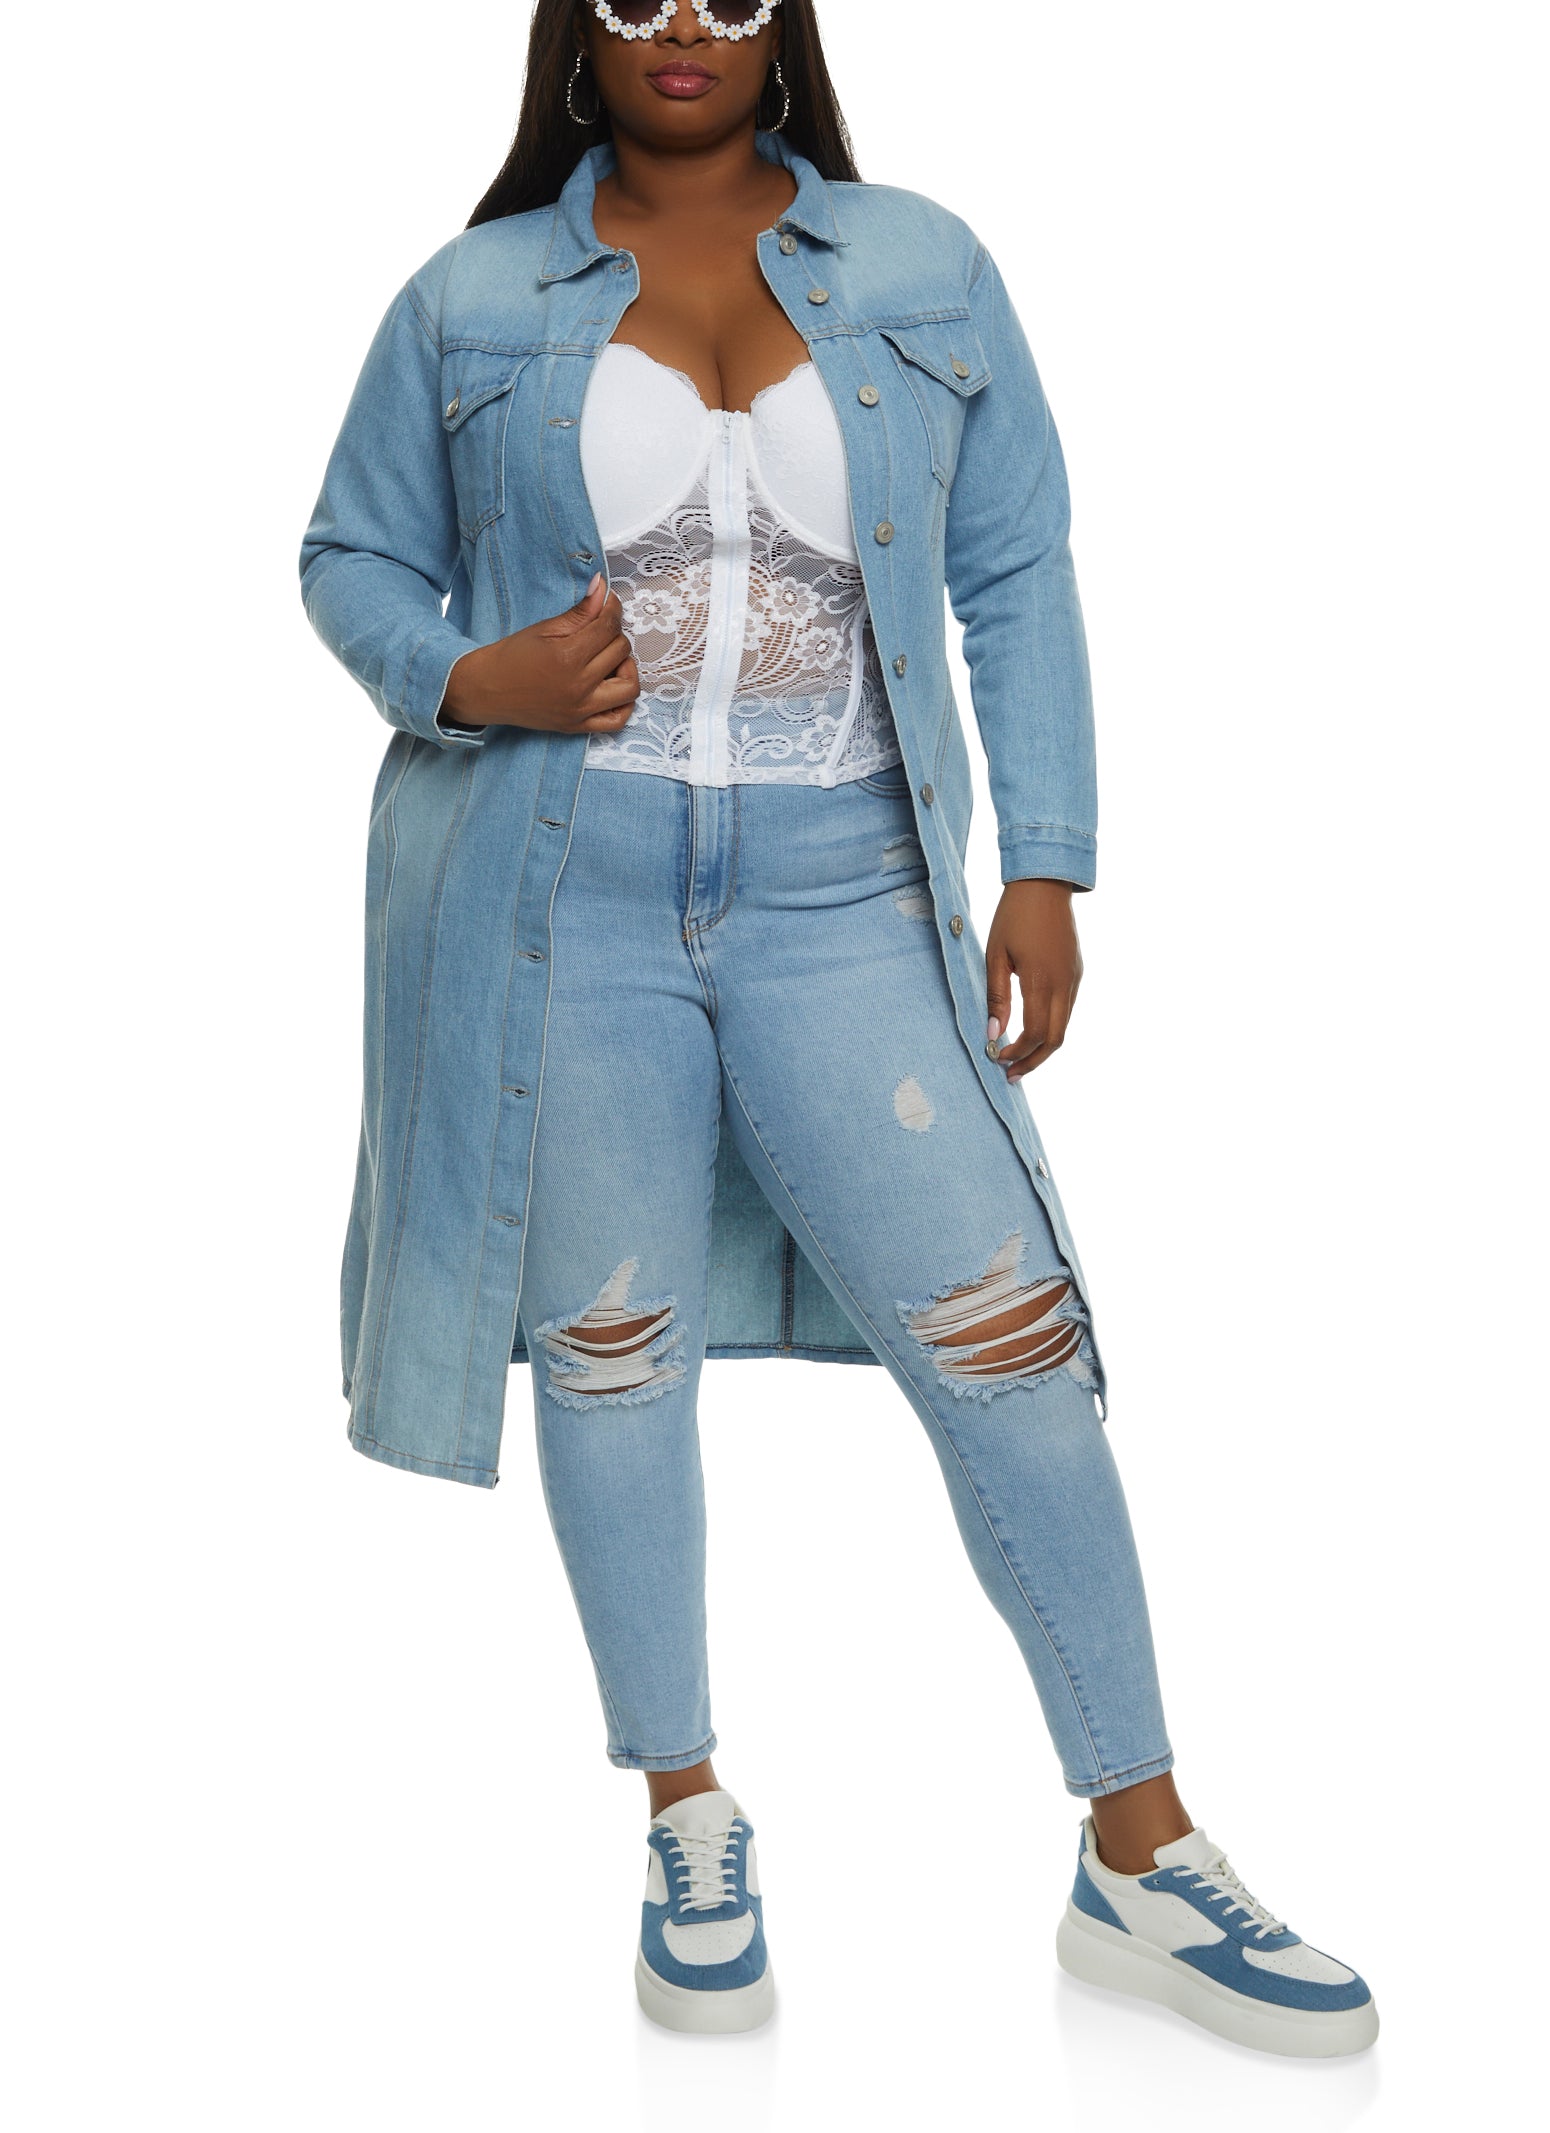 Plus Size Coats and Jackets, Everyday Low Prices